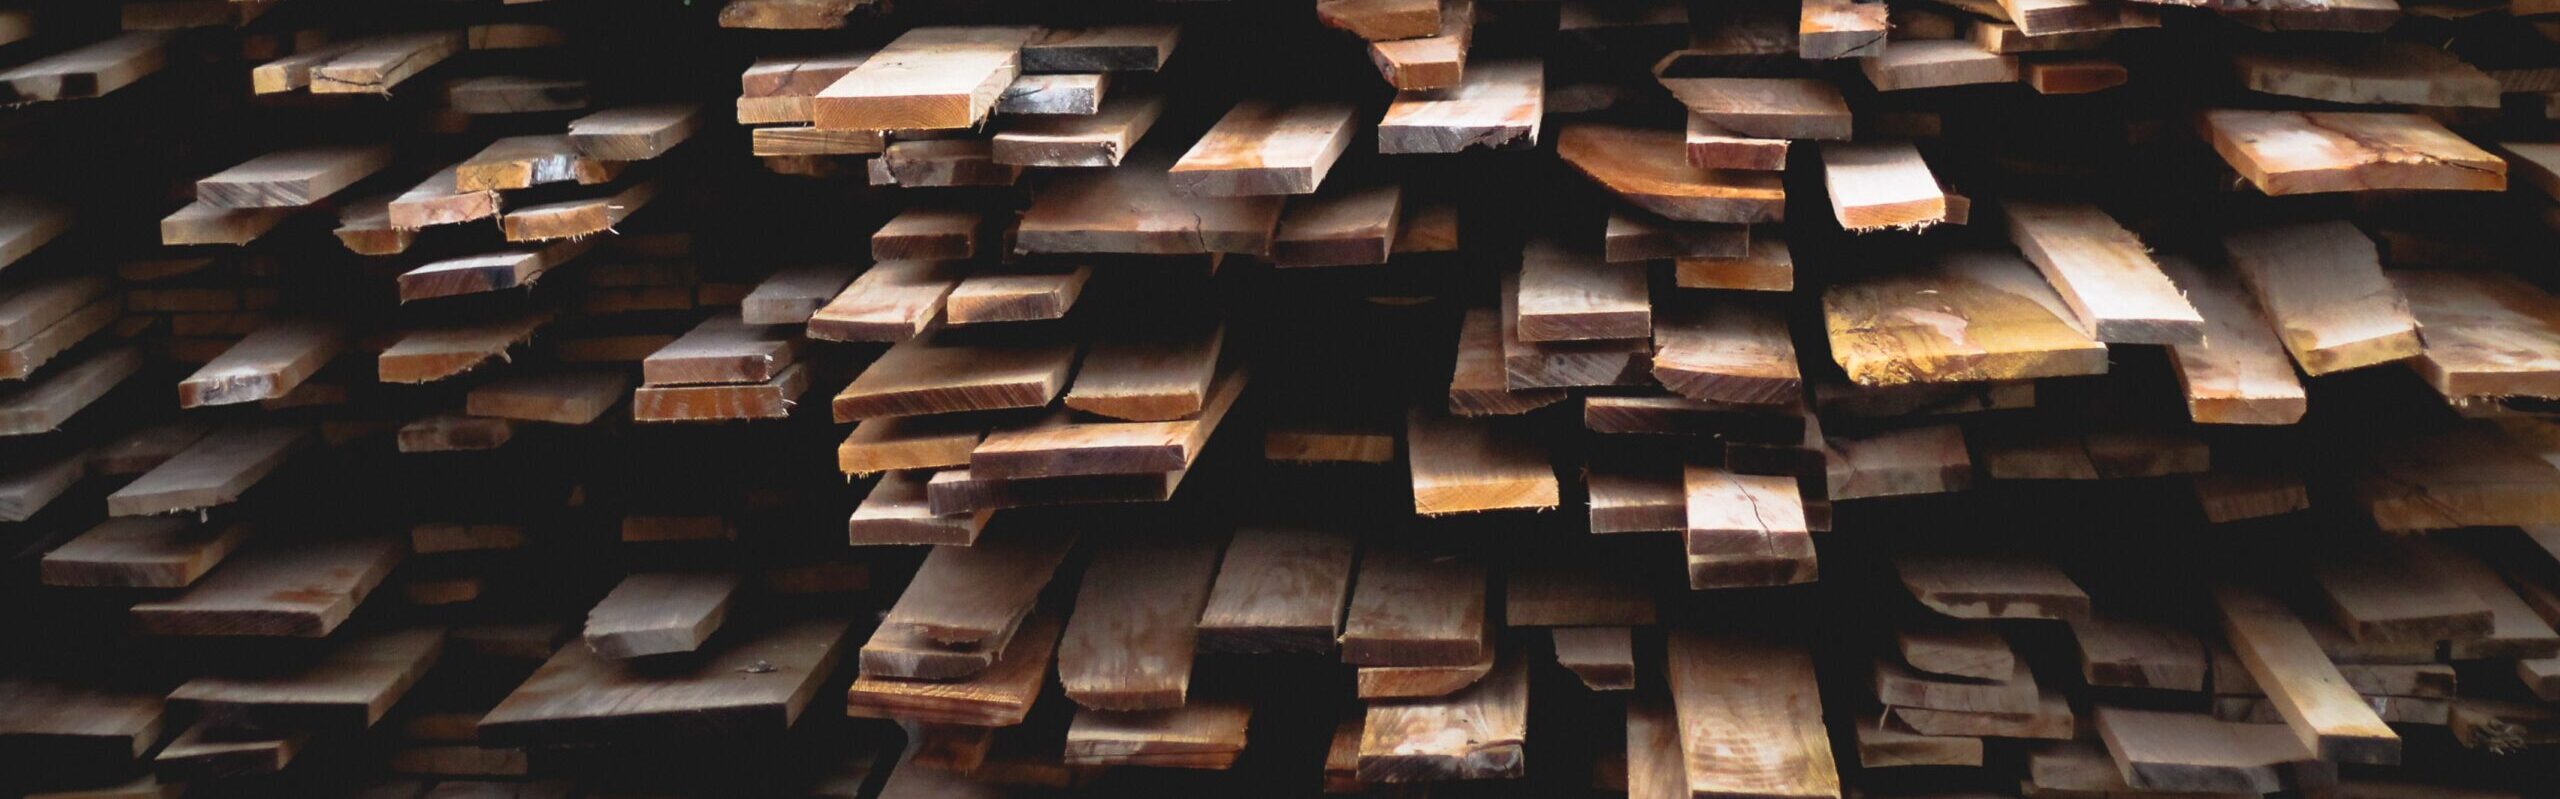 The wood planks in these stacks are each of different lengths. Why is no policy in place to make them easier to sort?